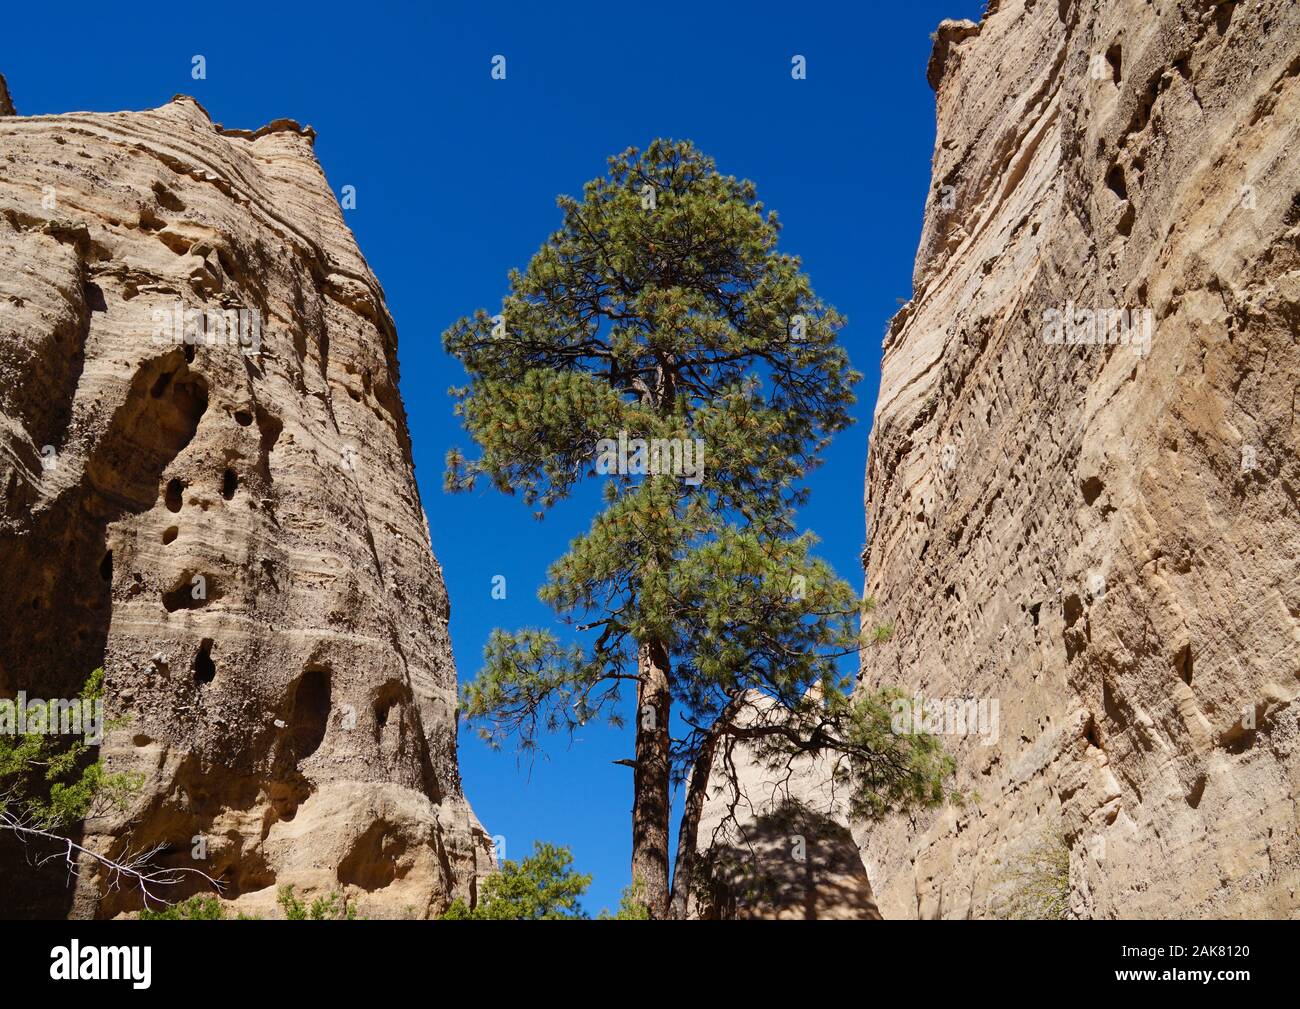 A large pine tree growing between the imposing sandstone walls in the entry of Tent Rocks Stock Photo